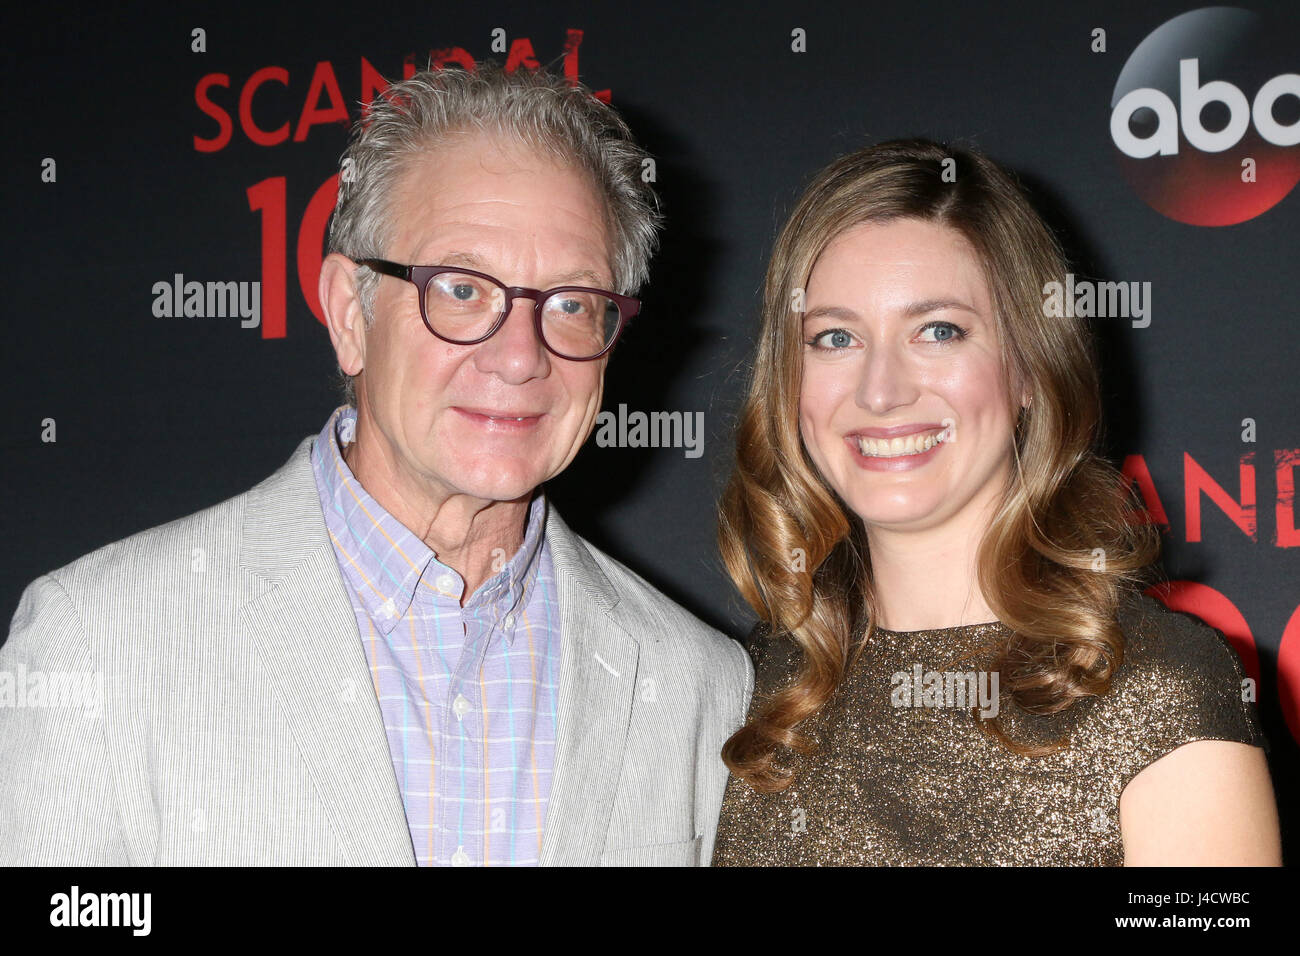 Jeff Perry and Zoe Perry attending ABC's 'Scandal' 100th episode celebration, at Fig & Olive in West Hollywood, California.  Featuring: Jeff Perry, Zoe Perry Where: West Hollywood, California, United States When: 10 Apr 2017 Credit: Nicky Nelson/WENN.com Stock Photo